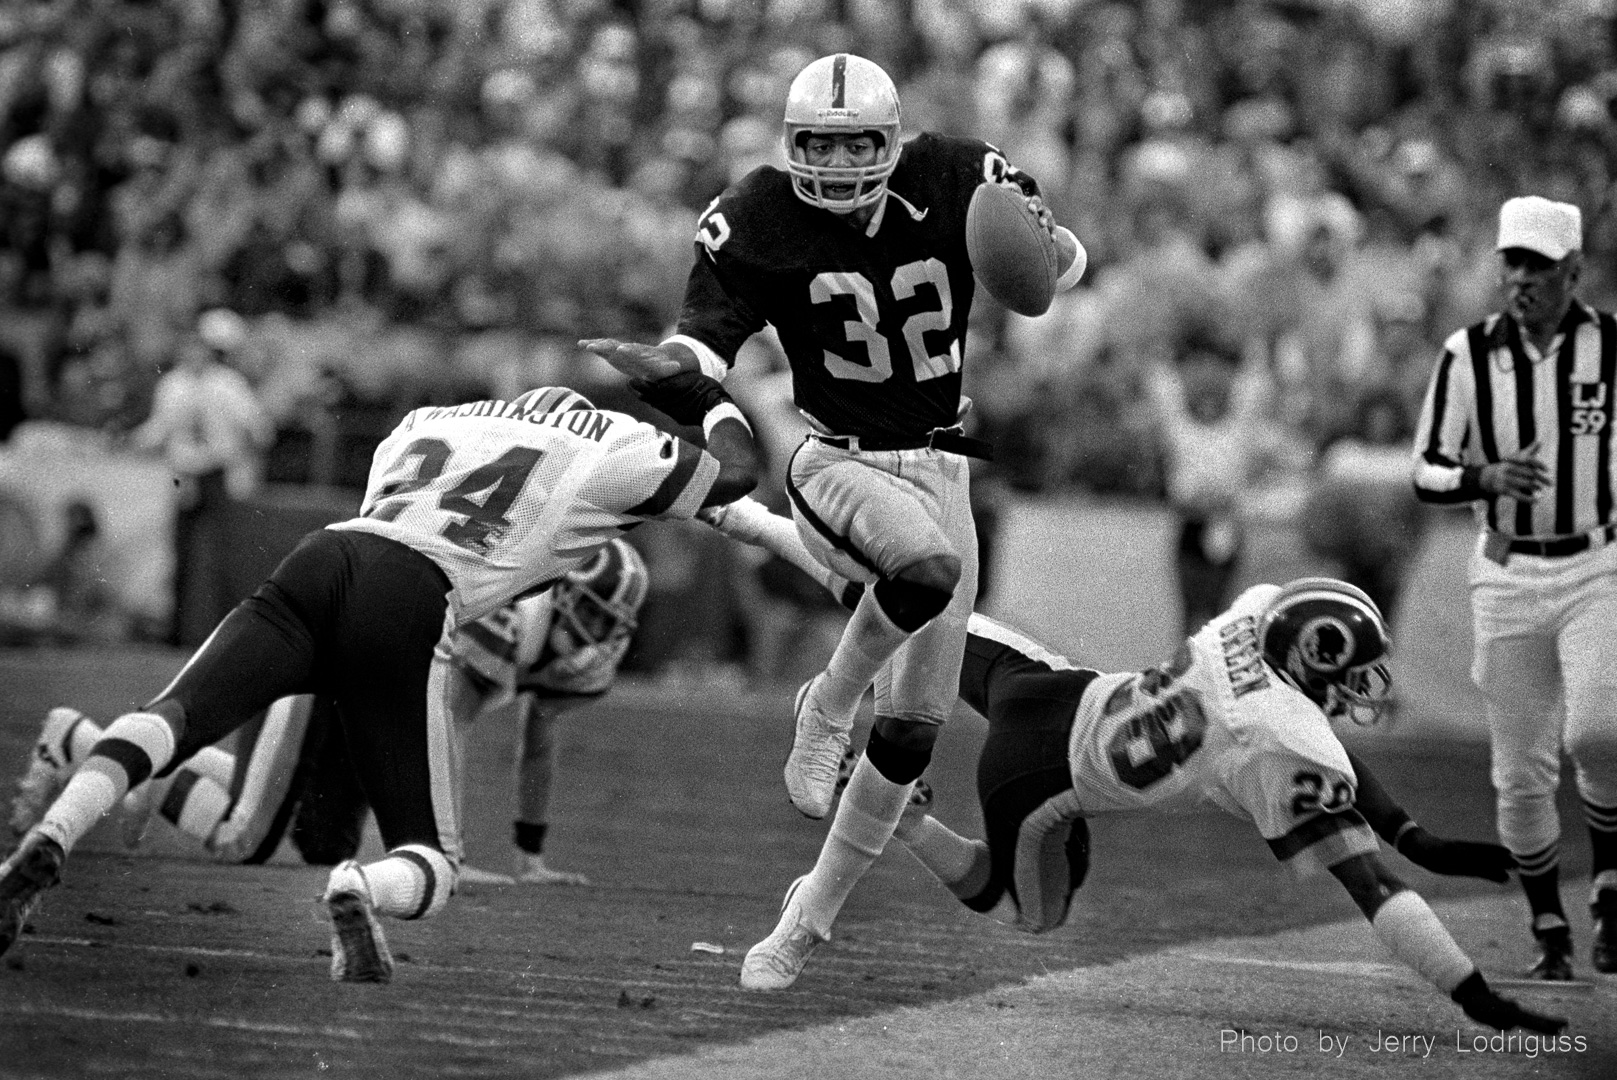 Marcus Allen, MVP of Superbowl XVIII, dodges Redskins on his way to a big gain. The Los Angeles Raiders beat the Washington Redskins 38-9 in Tampa Florida on January 22, 1984.